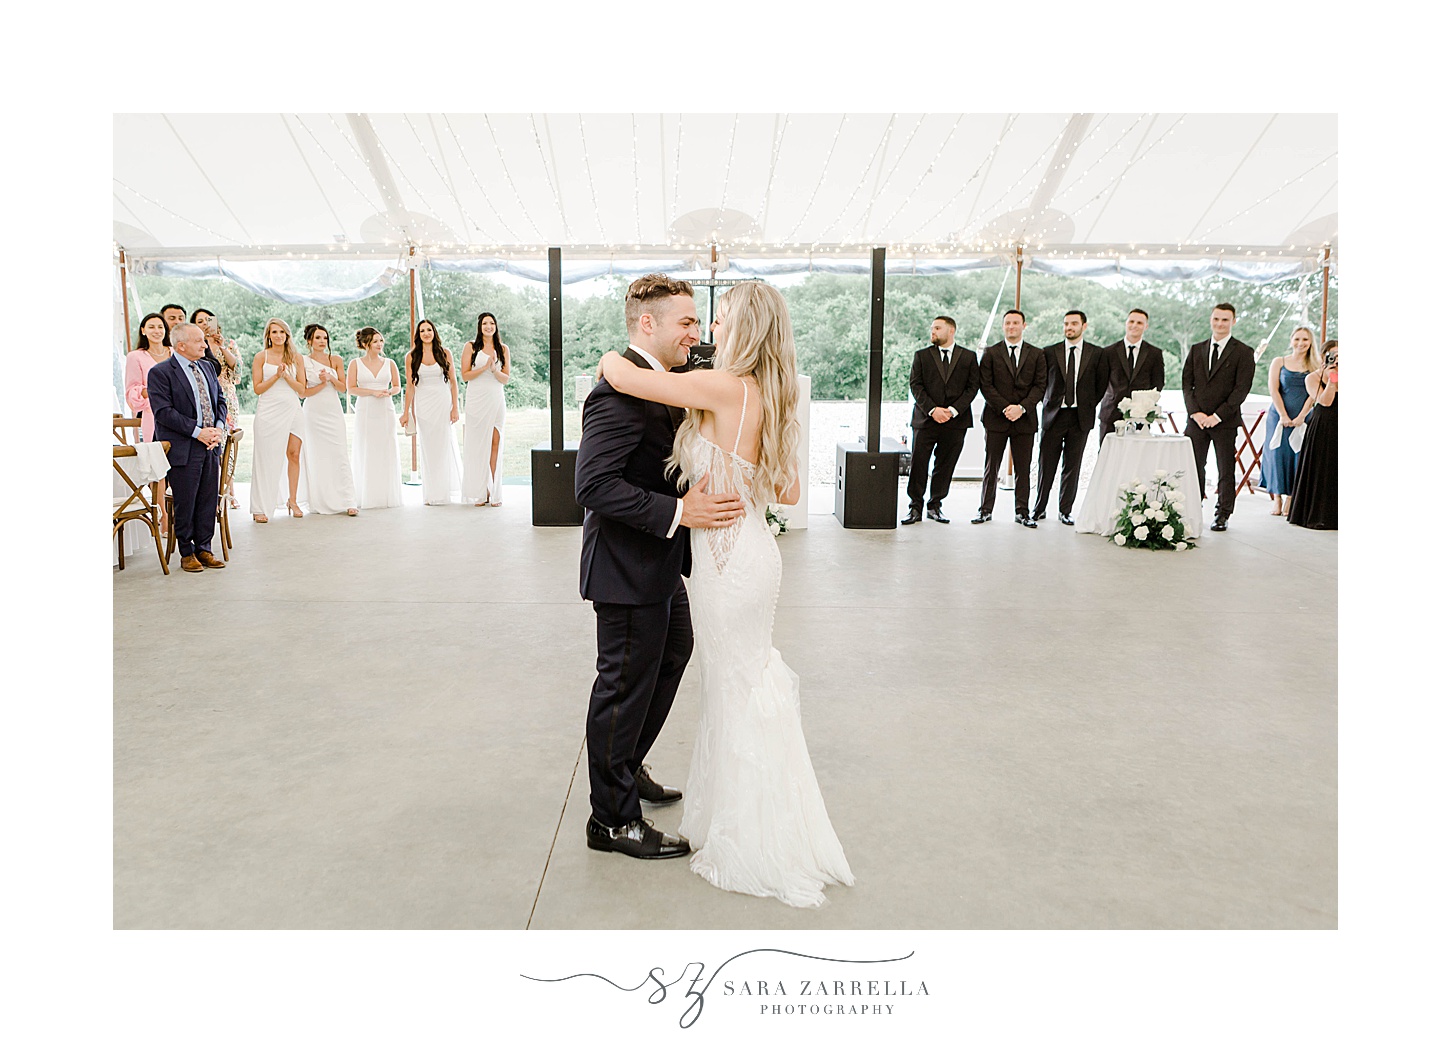 bride and groom dance under tent during wedding reception in Rhode Island at Shepard's Run